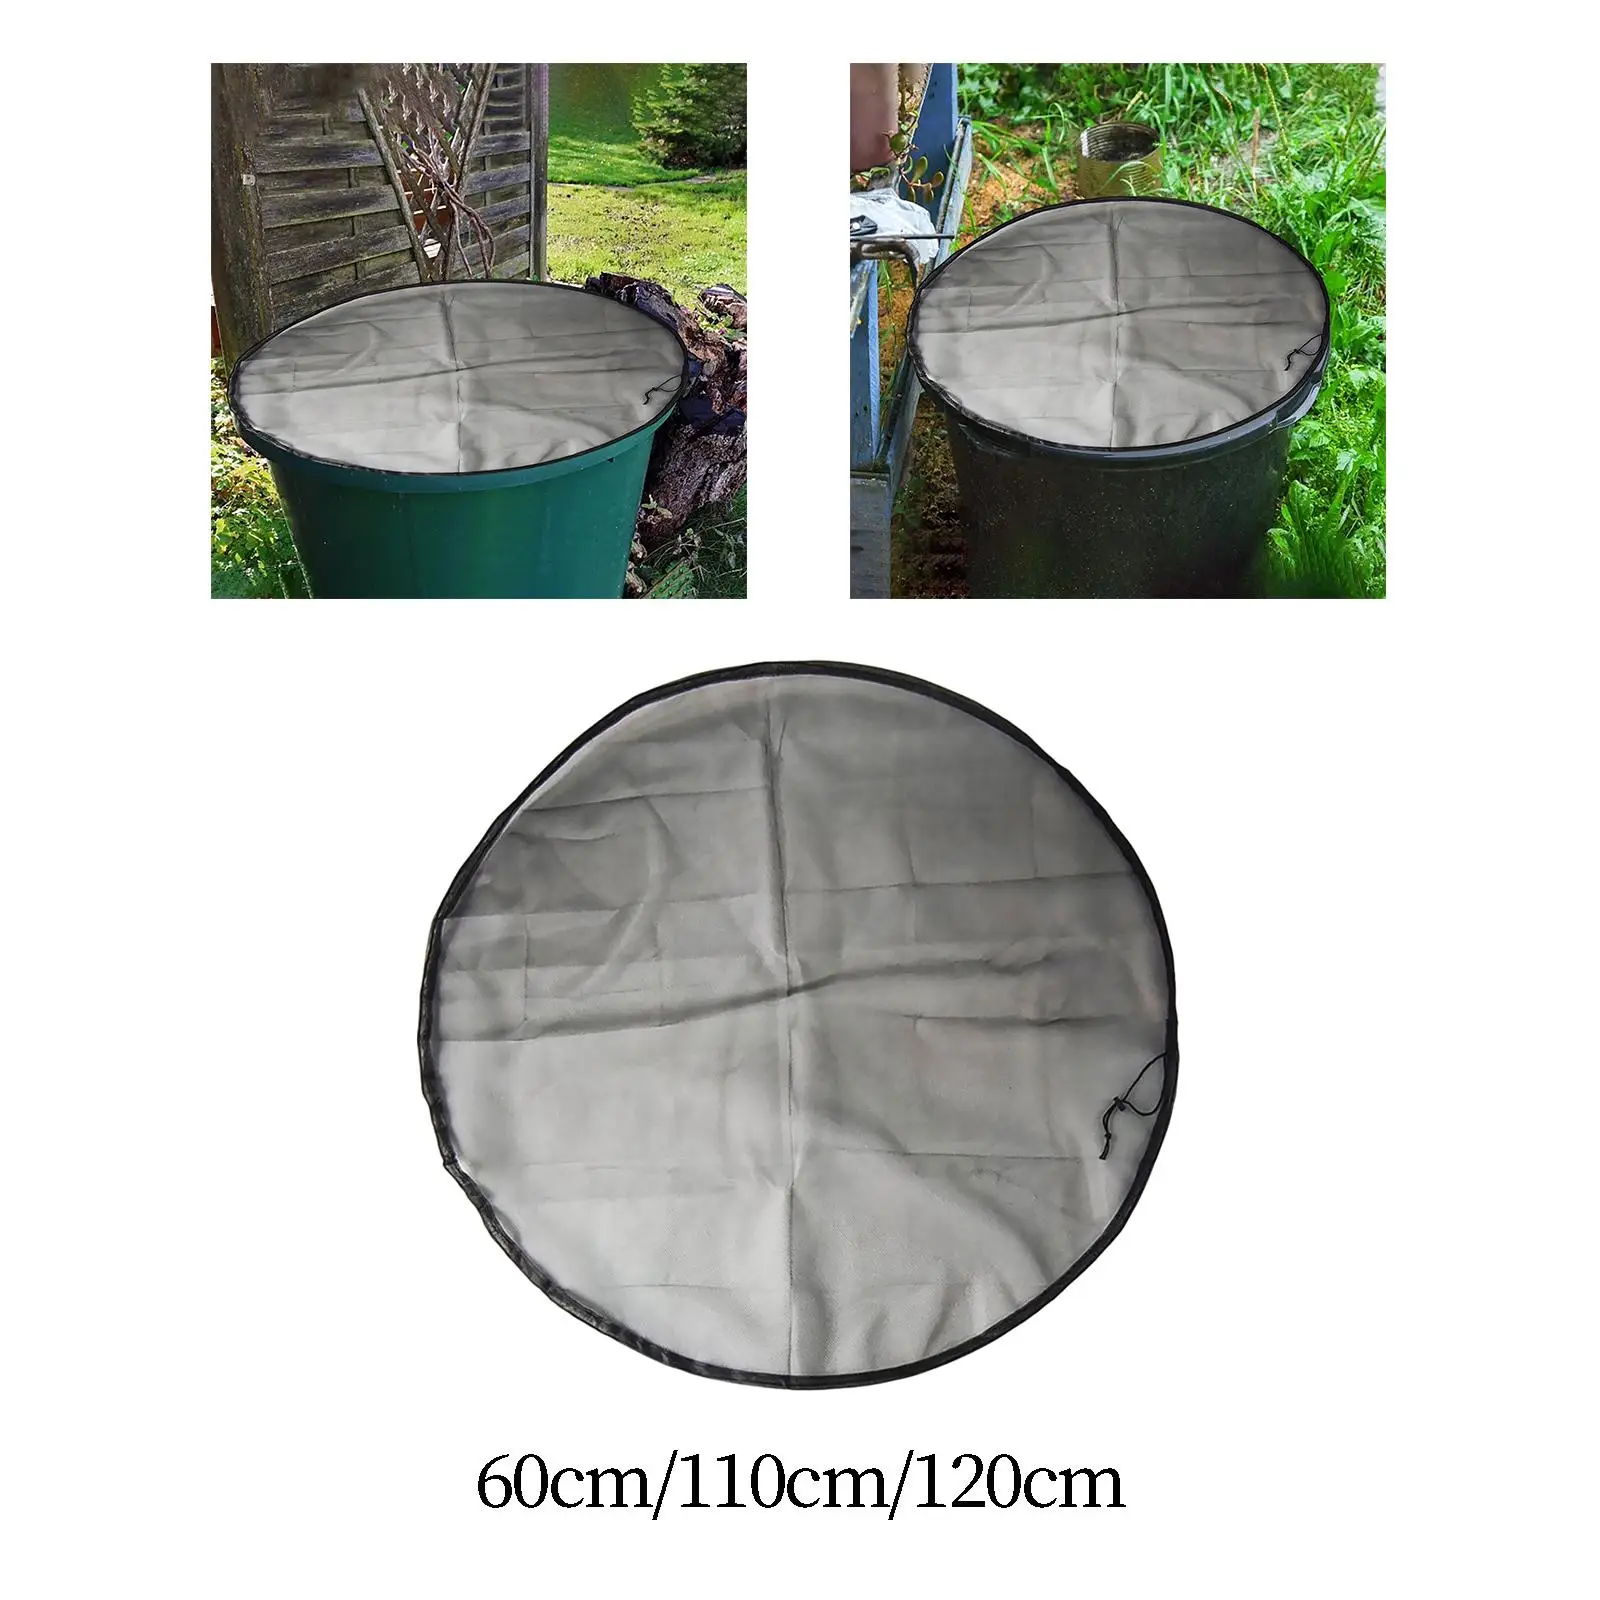 Mesh Cover for Rain Barrel Water Collection Buckets Tank Protector Water Bucket